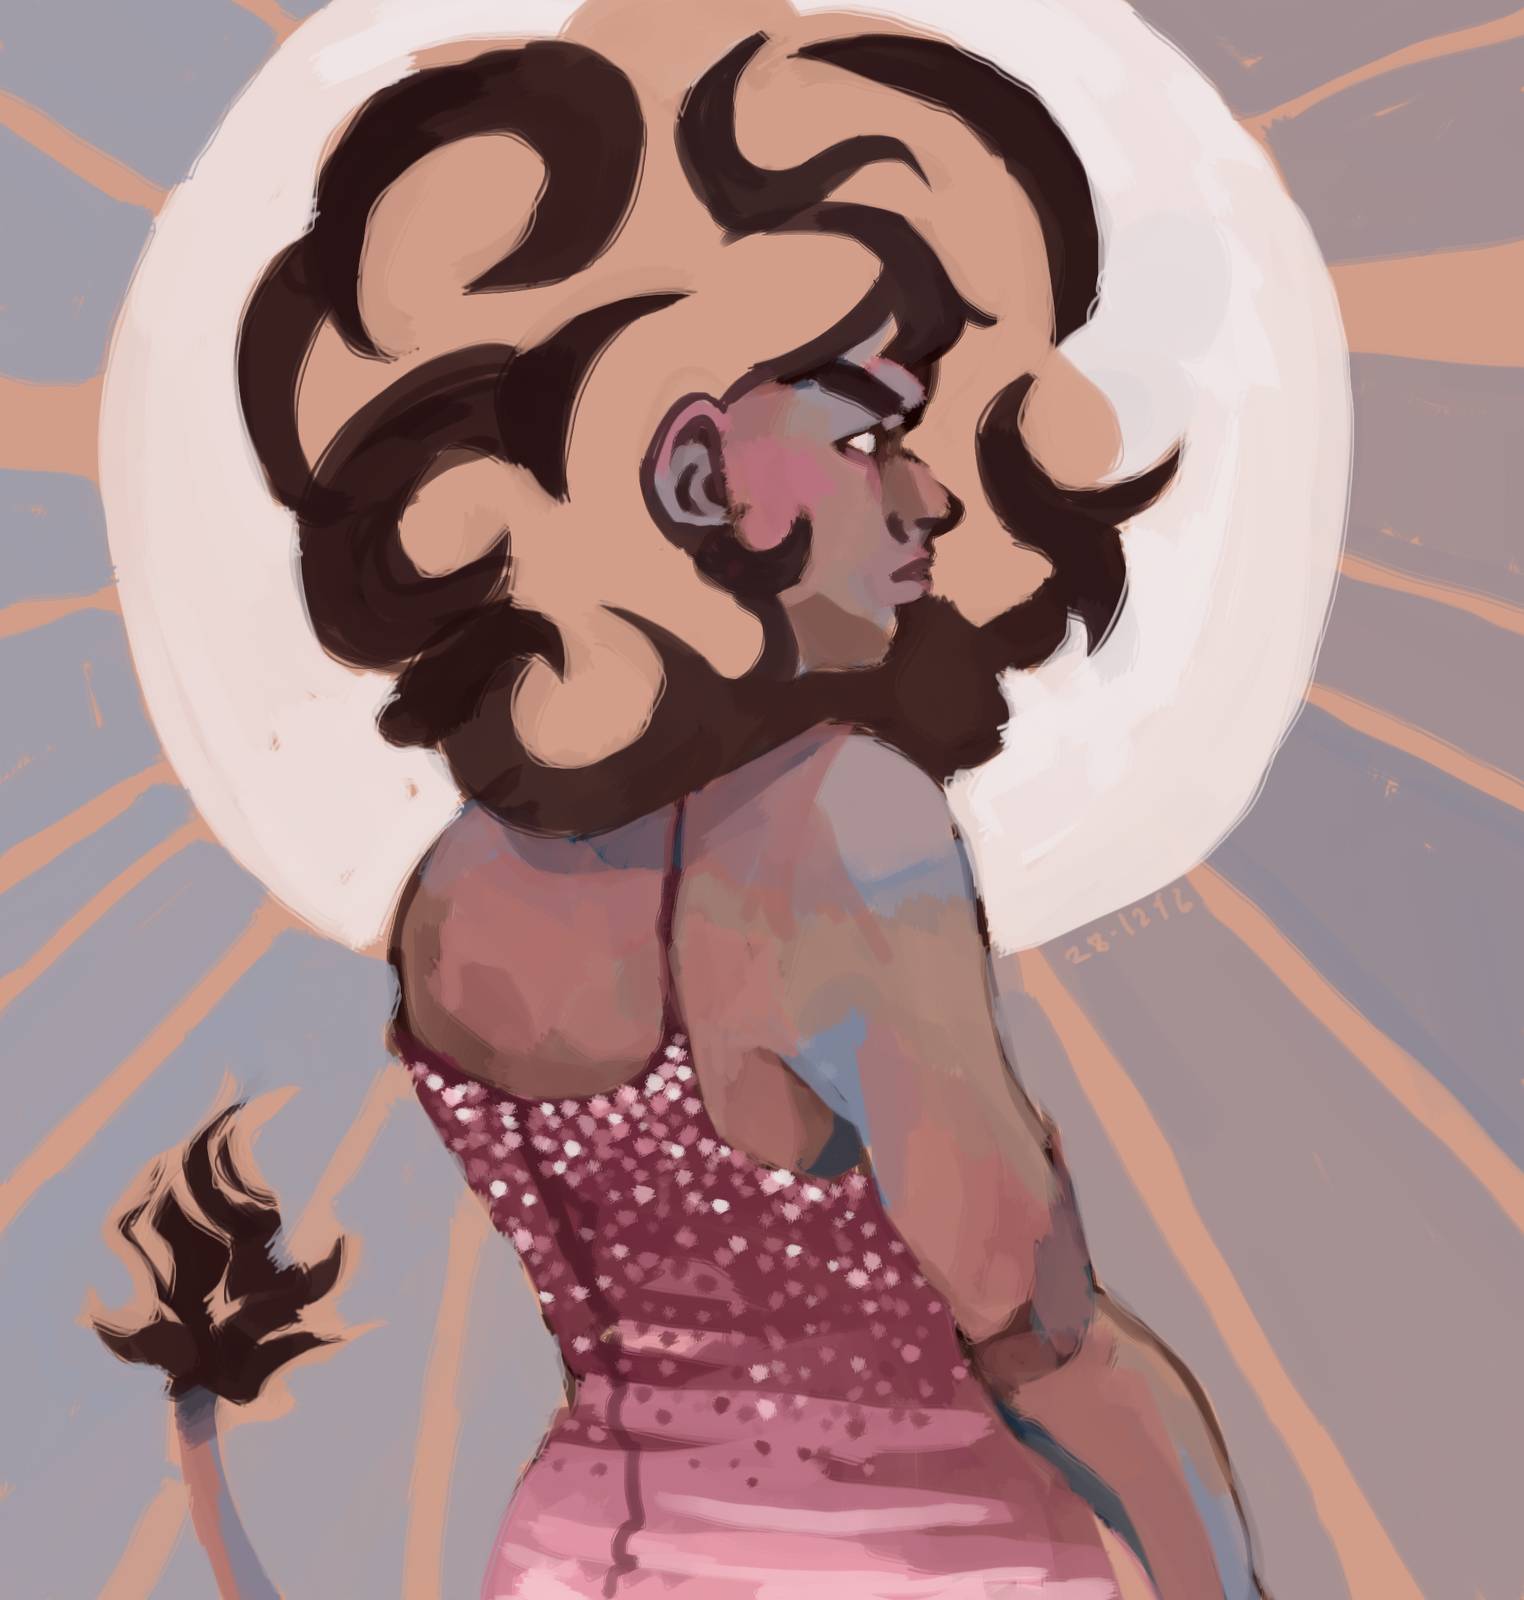 olive skinned lion person standing at quarte back view, wearing a pink dress with sequins, looking perturbed. Big hair